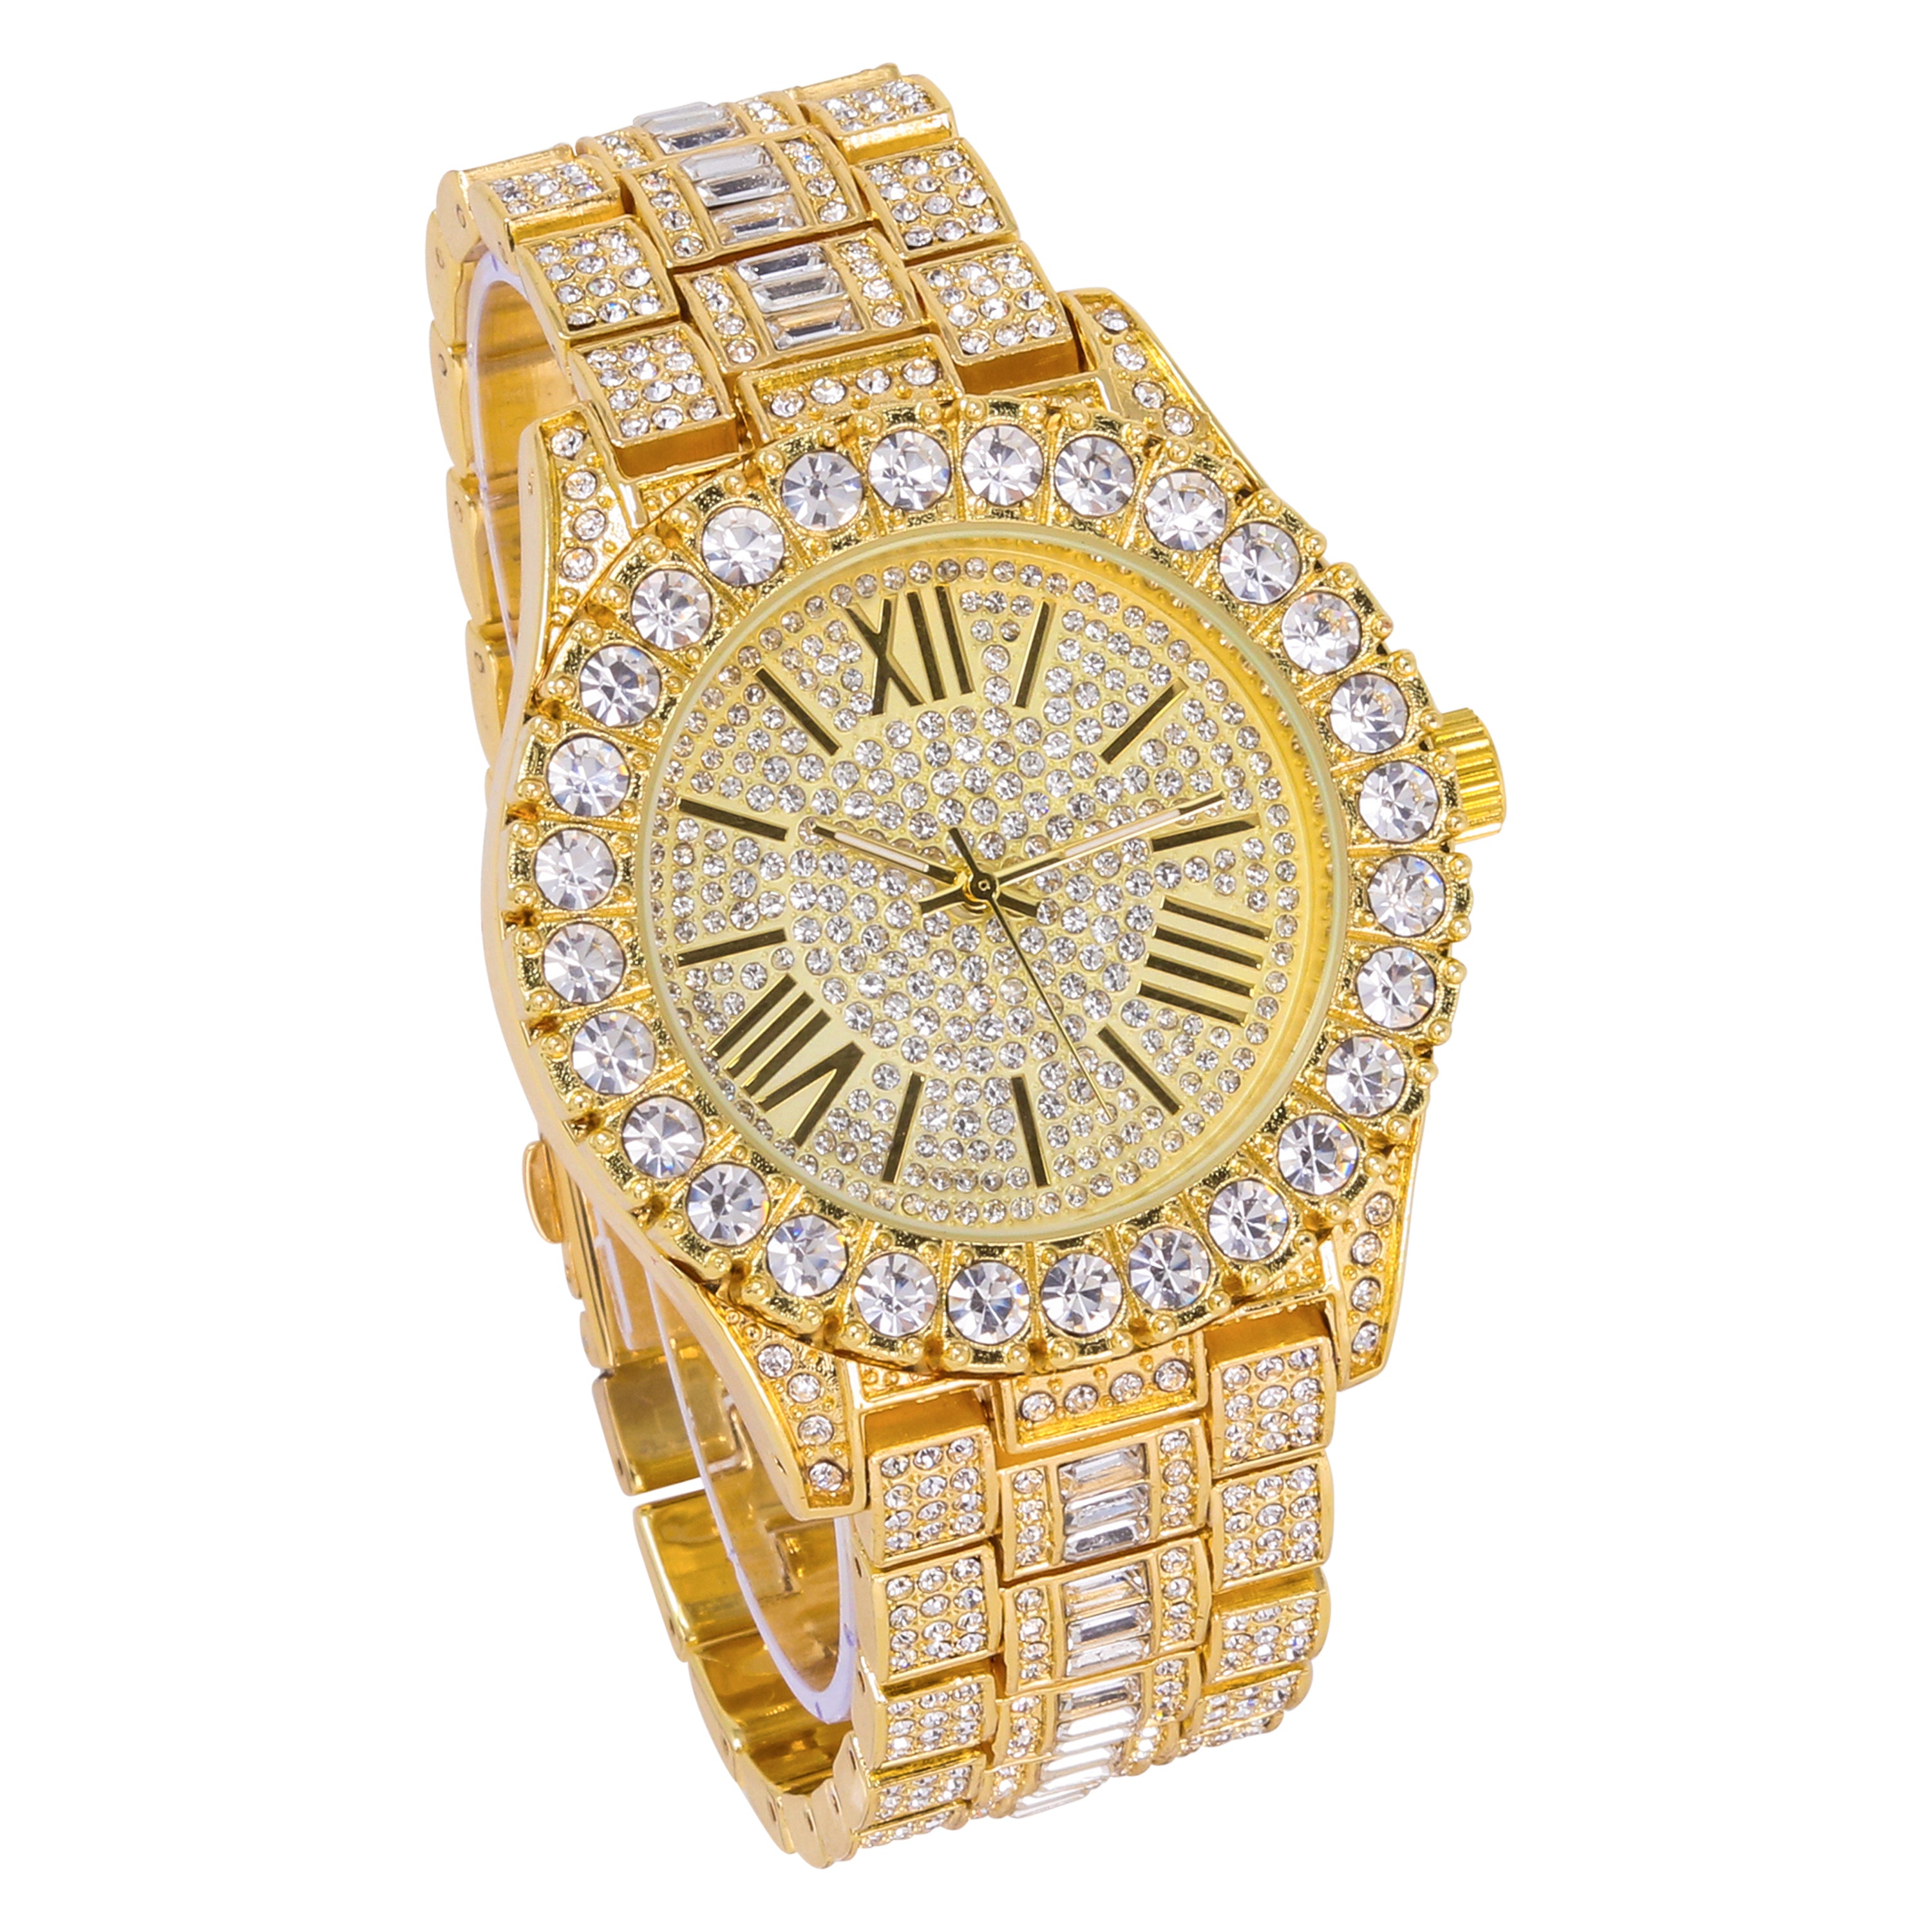 Men's Round Roman Dial Watch 43mm Gold - "Fully Iced Band"